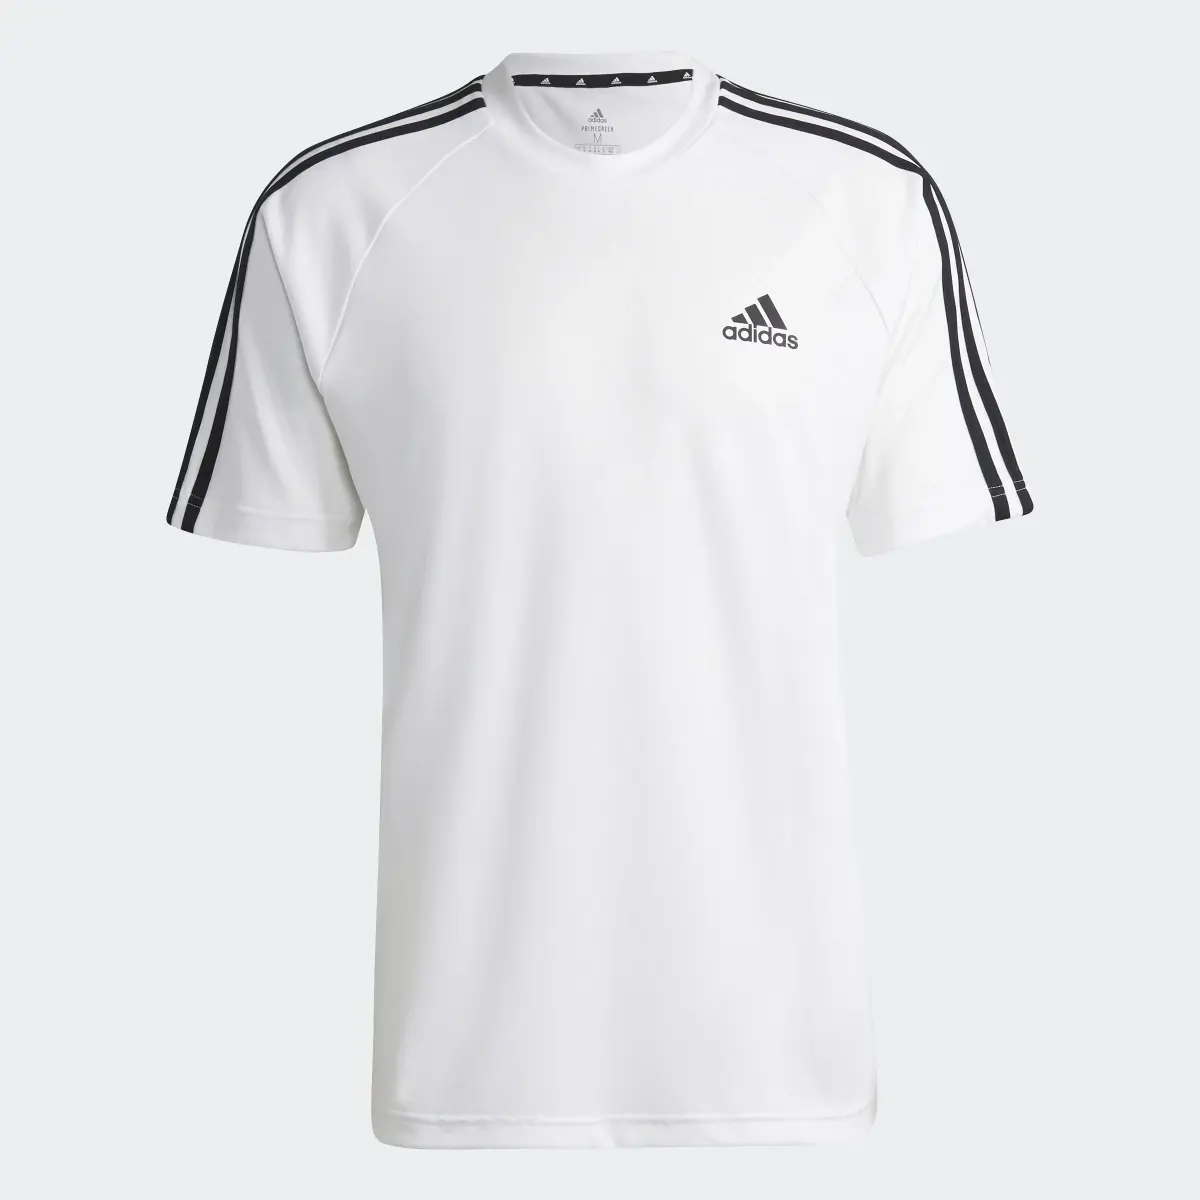 Adidas A FOOTBALL SHIRT FOR FRIENDLY MATCHES AND CROSS TRAINING. 1